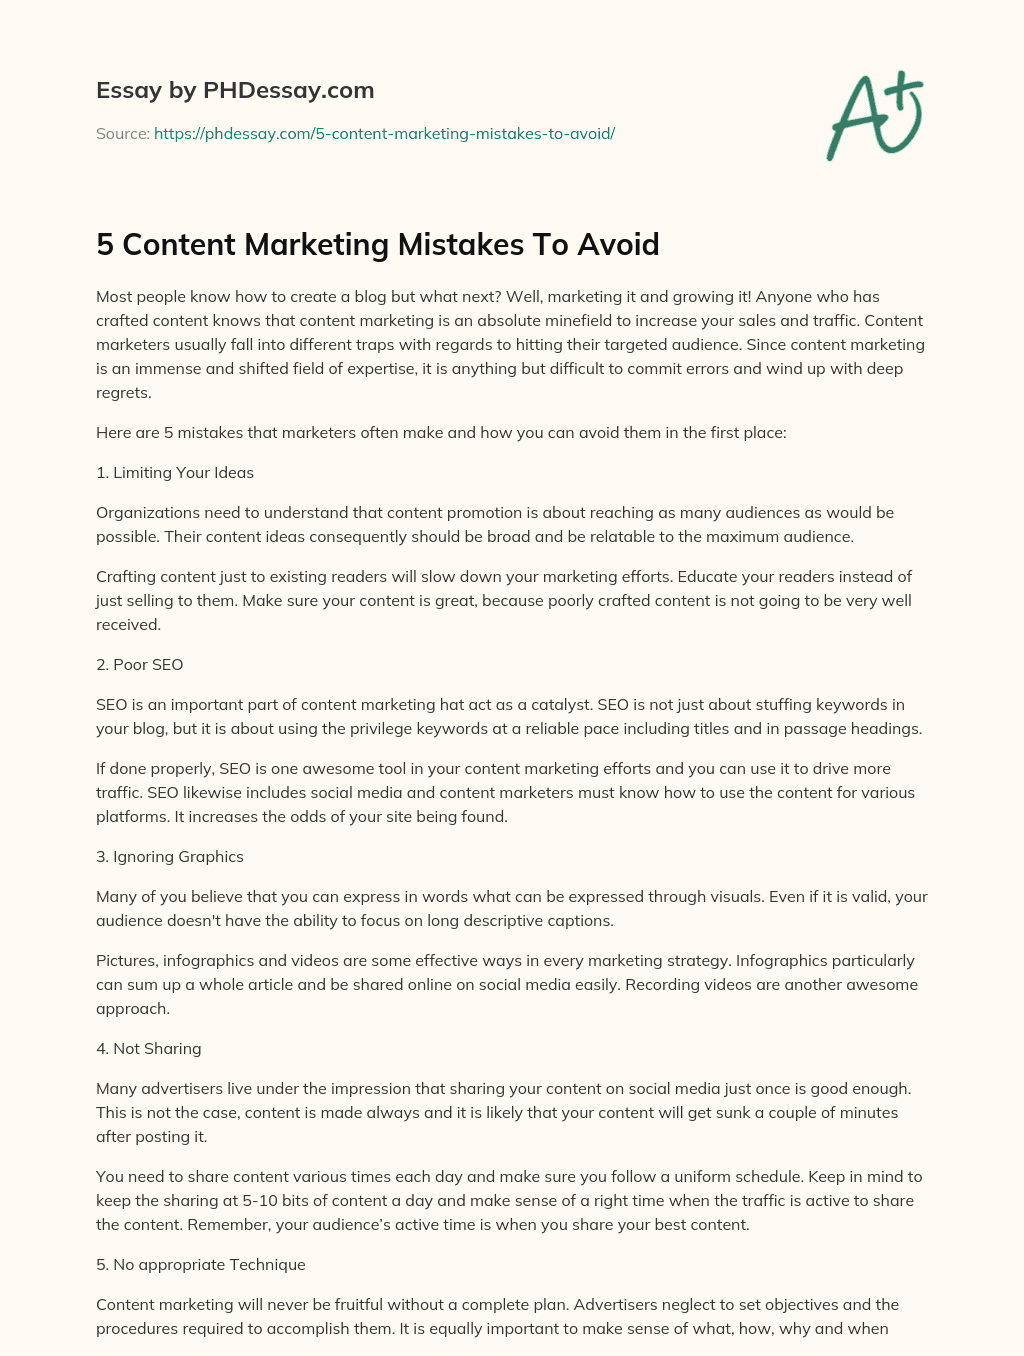 5 Content Marketing Mistakes To Avoid essay